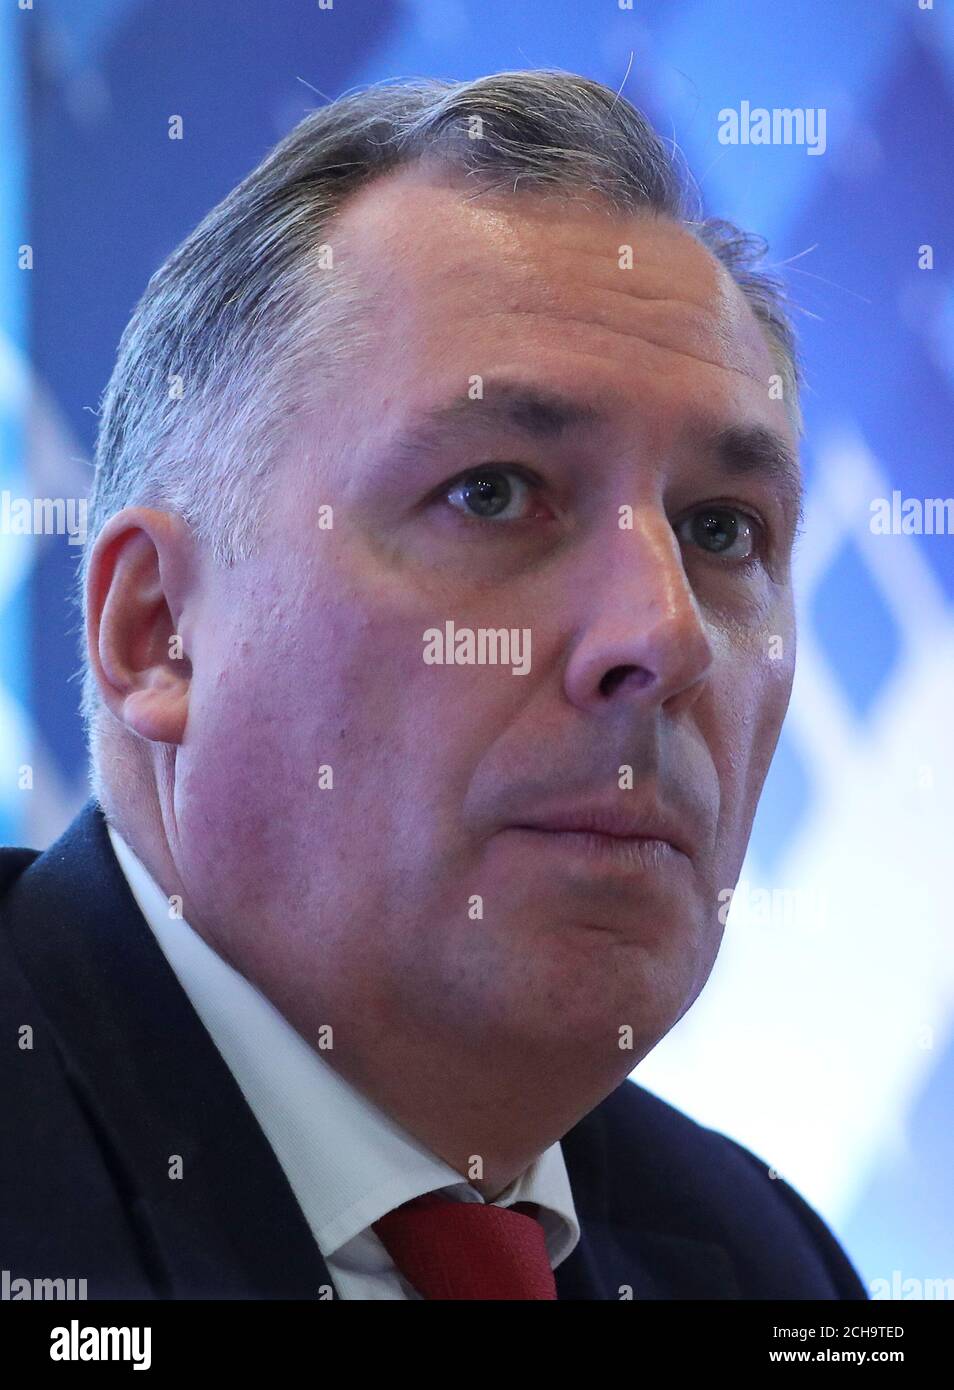 President of the Olympic Committee of Russia Stanislav Pozdnyakov attends an annual meeting of the committee with sports federations, academies, member organizations, coaches and athletes in Moscow, Russia November 28, 2019. REUTERS/Evgenia Novozhenina Stock Photo